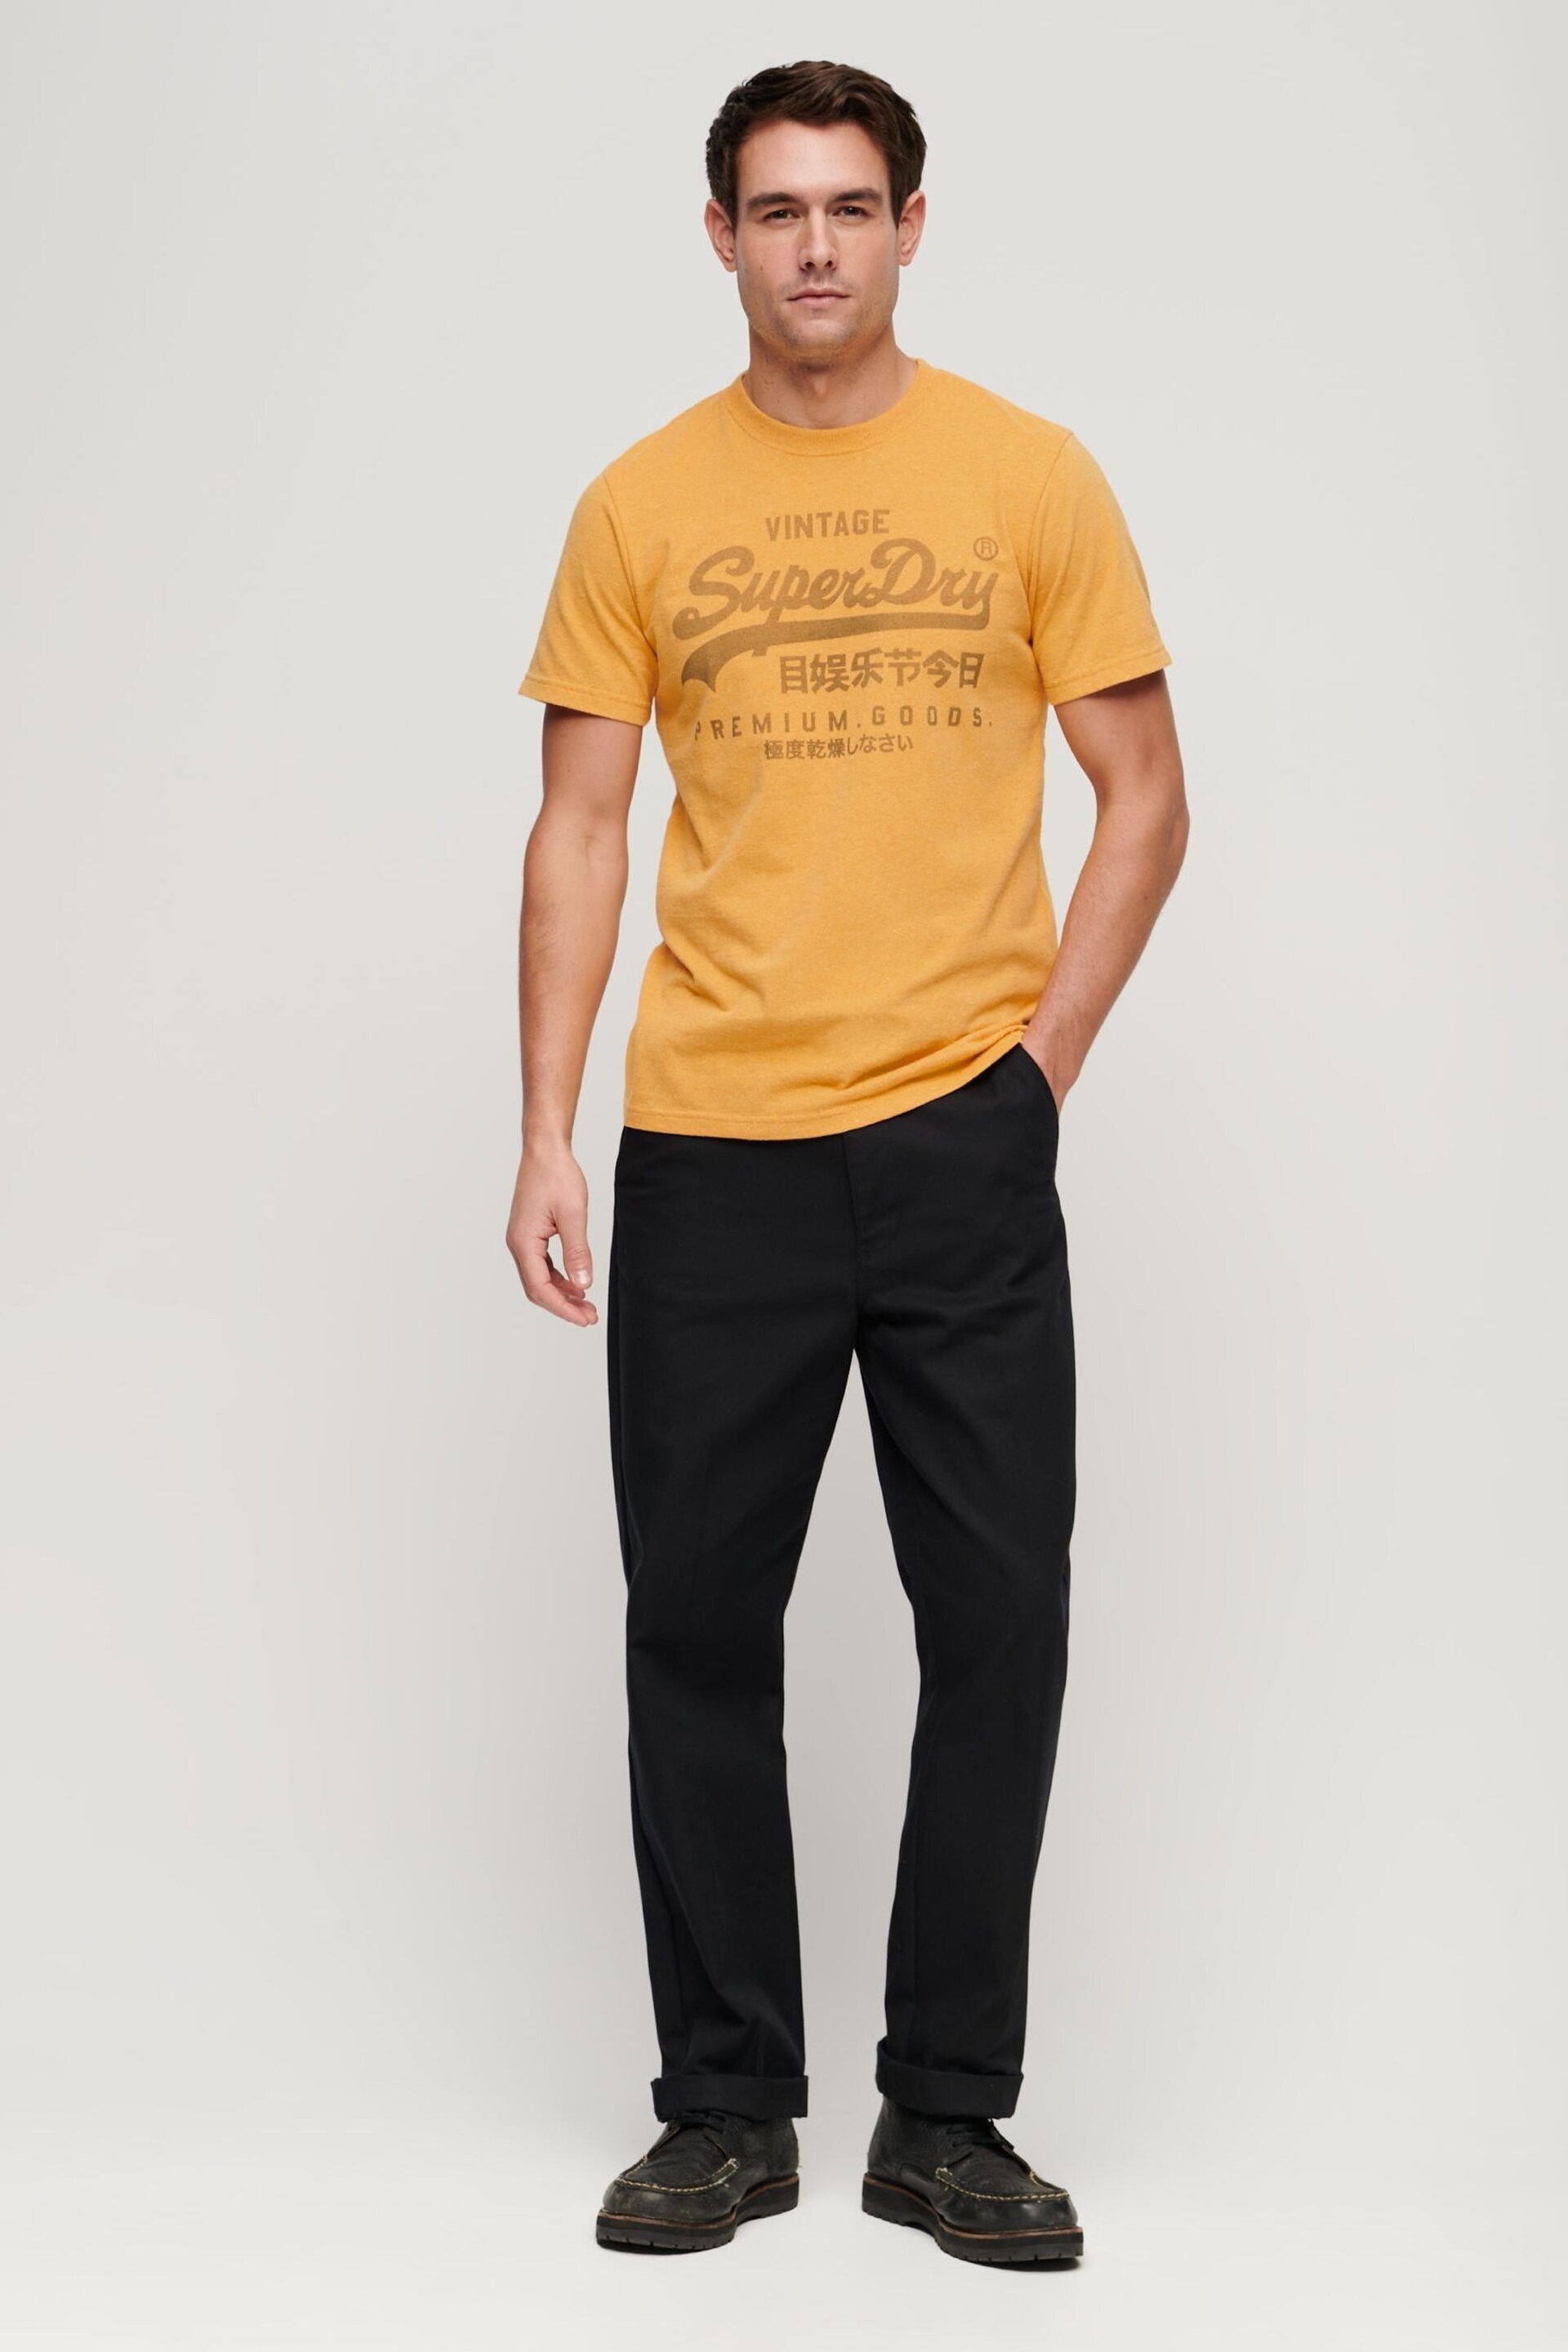 Superdry Yellow Classic Heritage T-Shirt - Image 2 of 3